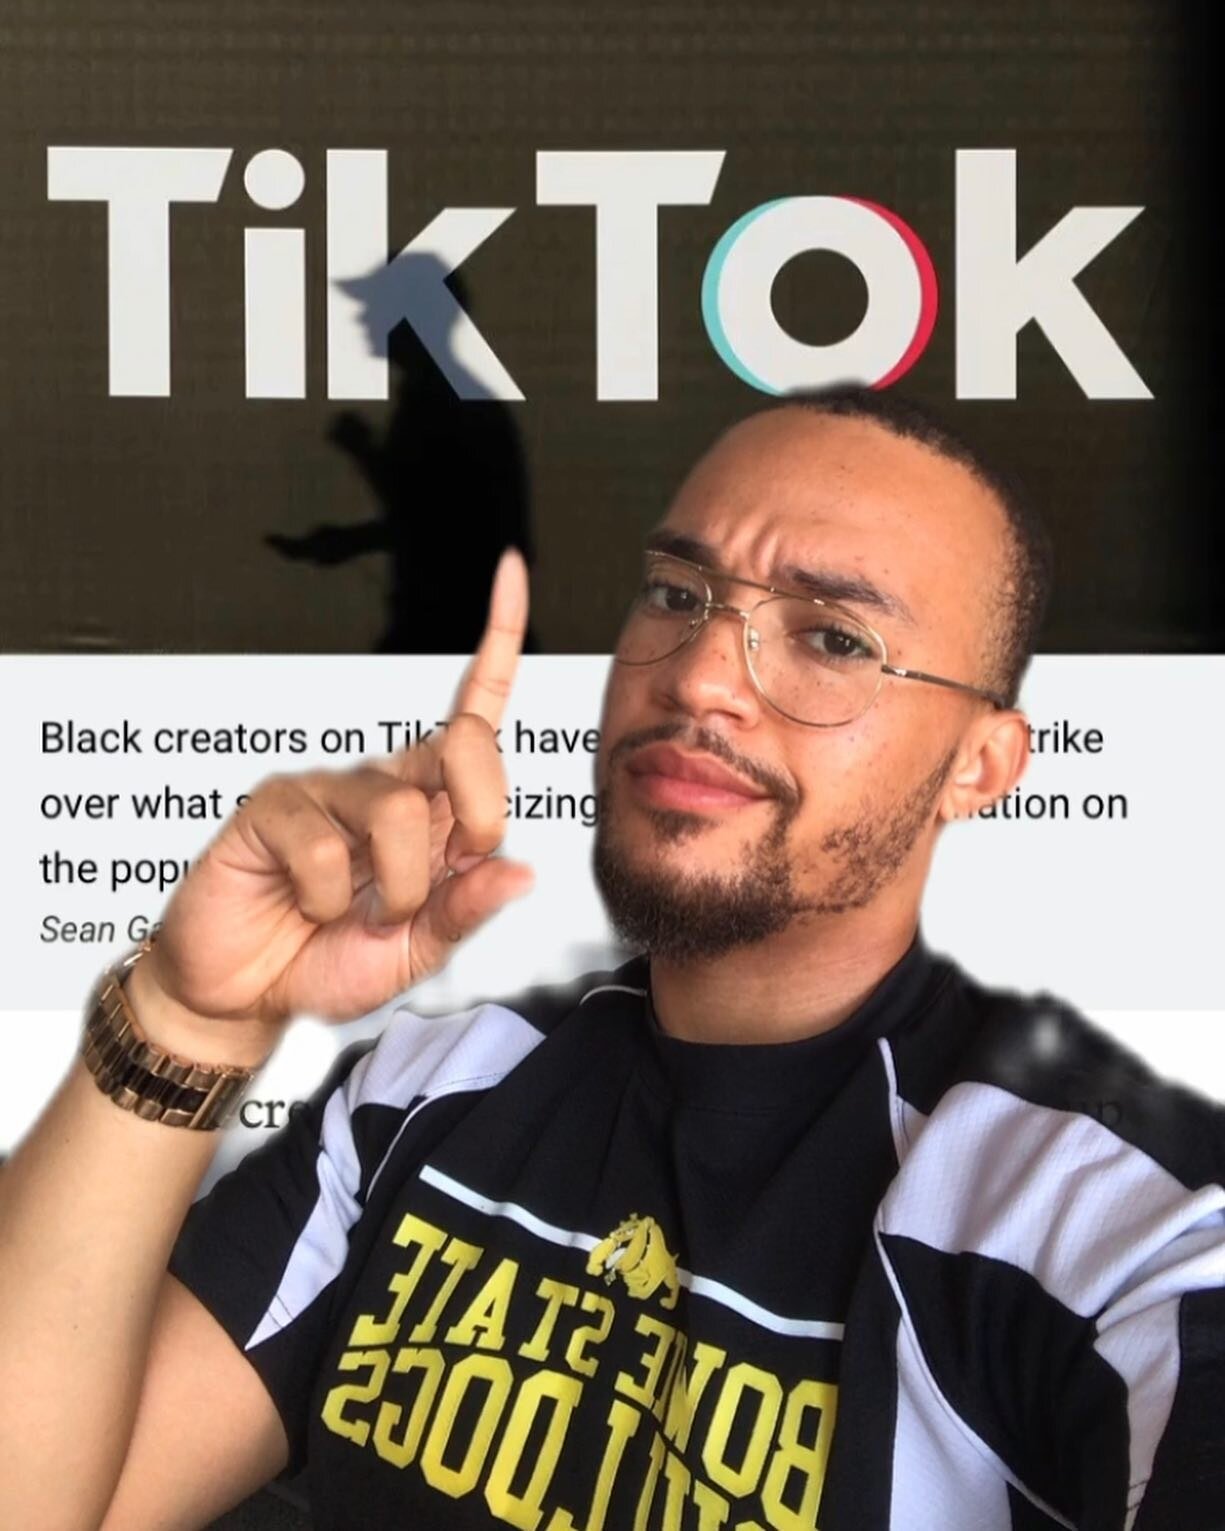 Black TikTok Creators are on strike🪧&hellip; What are your thoughts on this, what do you think should be done? 

Comment Below

.
.
.
.
.
#tiktok #creators #blacktiktokstrike #blacktiktok #blacktiktokers #blacklivesmatter #blacktiktoks #blackownedbu